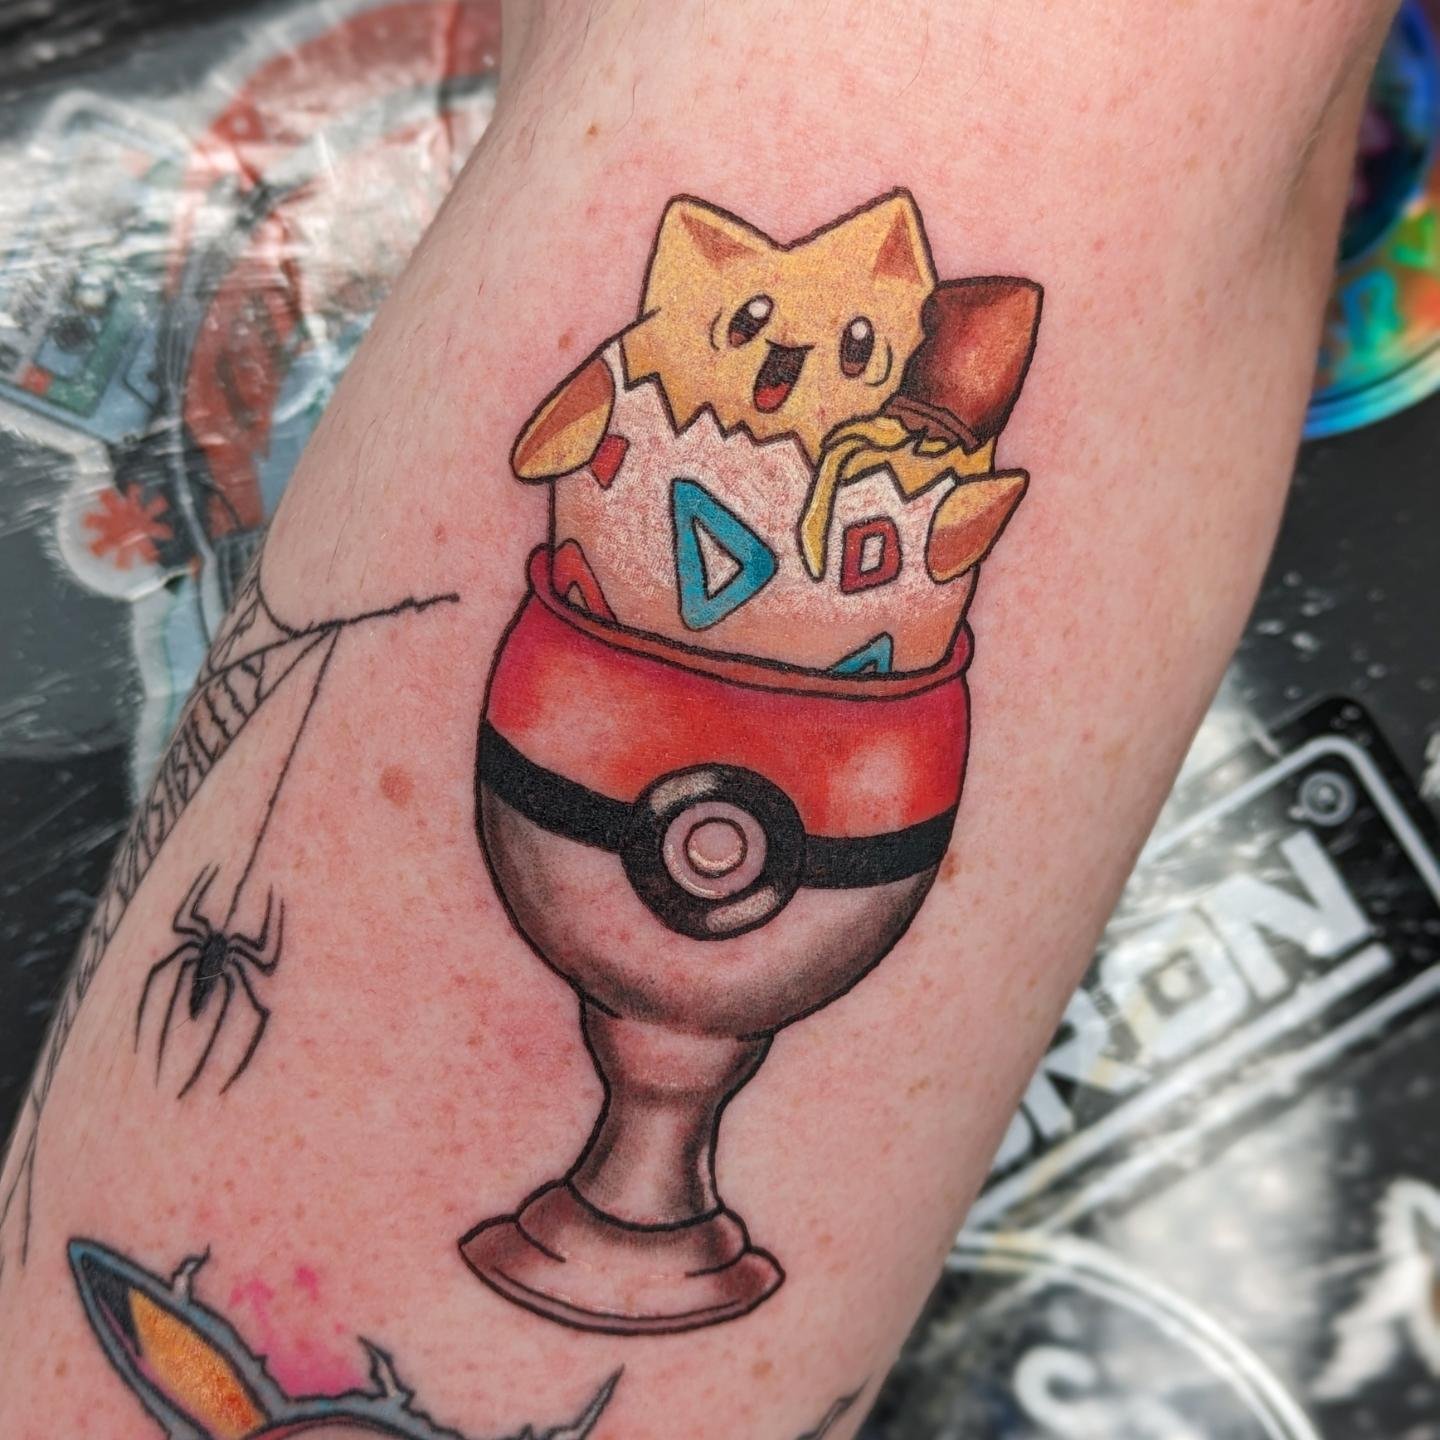 Callum's Pok&eacute;mon collection is growing!
Cracked egg head Togepi sat in his Pokeball eggcup added today by @rachjackson.tattoo 😍😍

Pikachu is almost 1 month healed. Just needed a couple small touch ups in the yellow but settling in lovely!

T